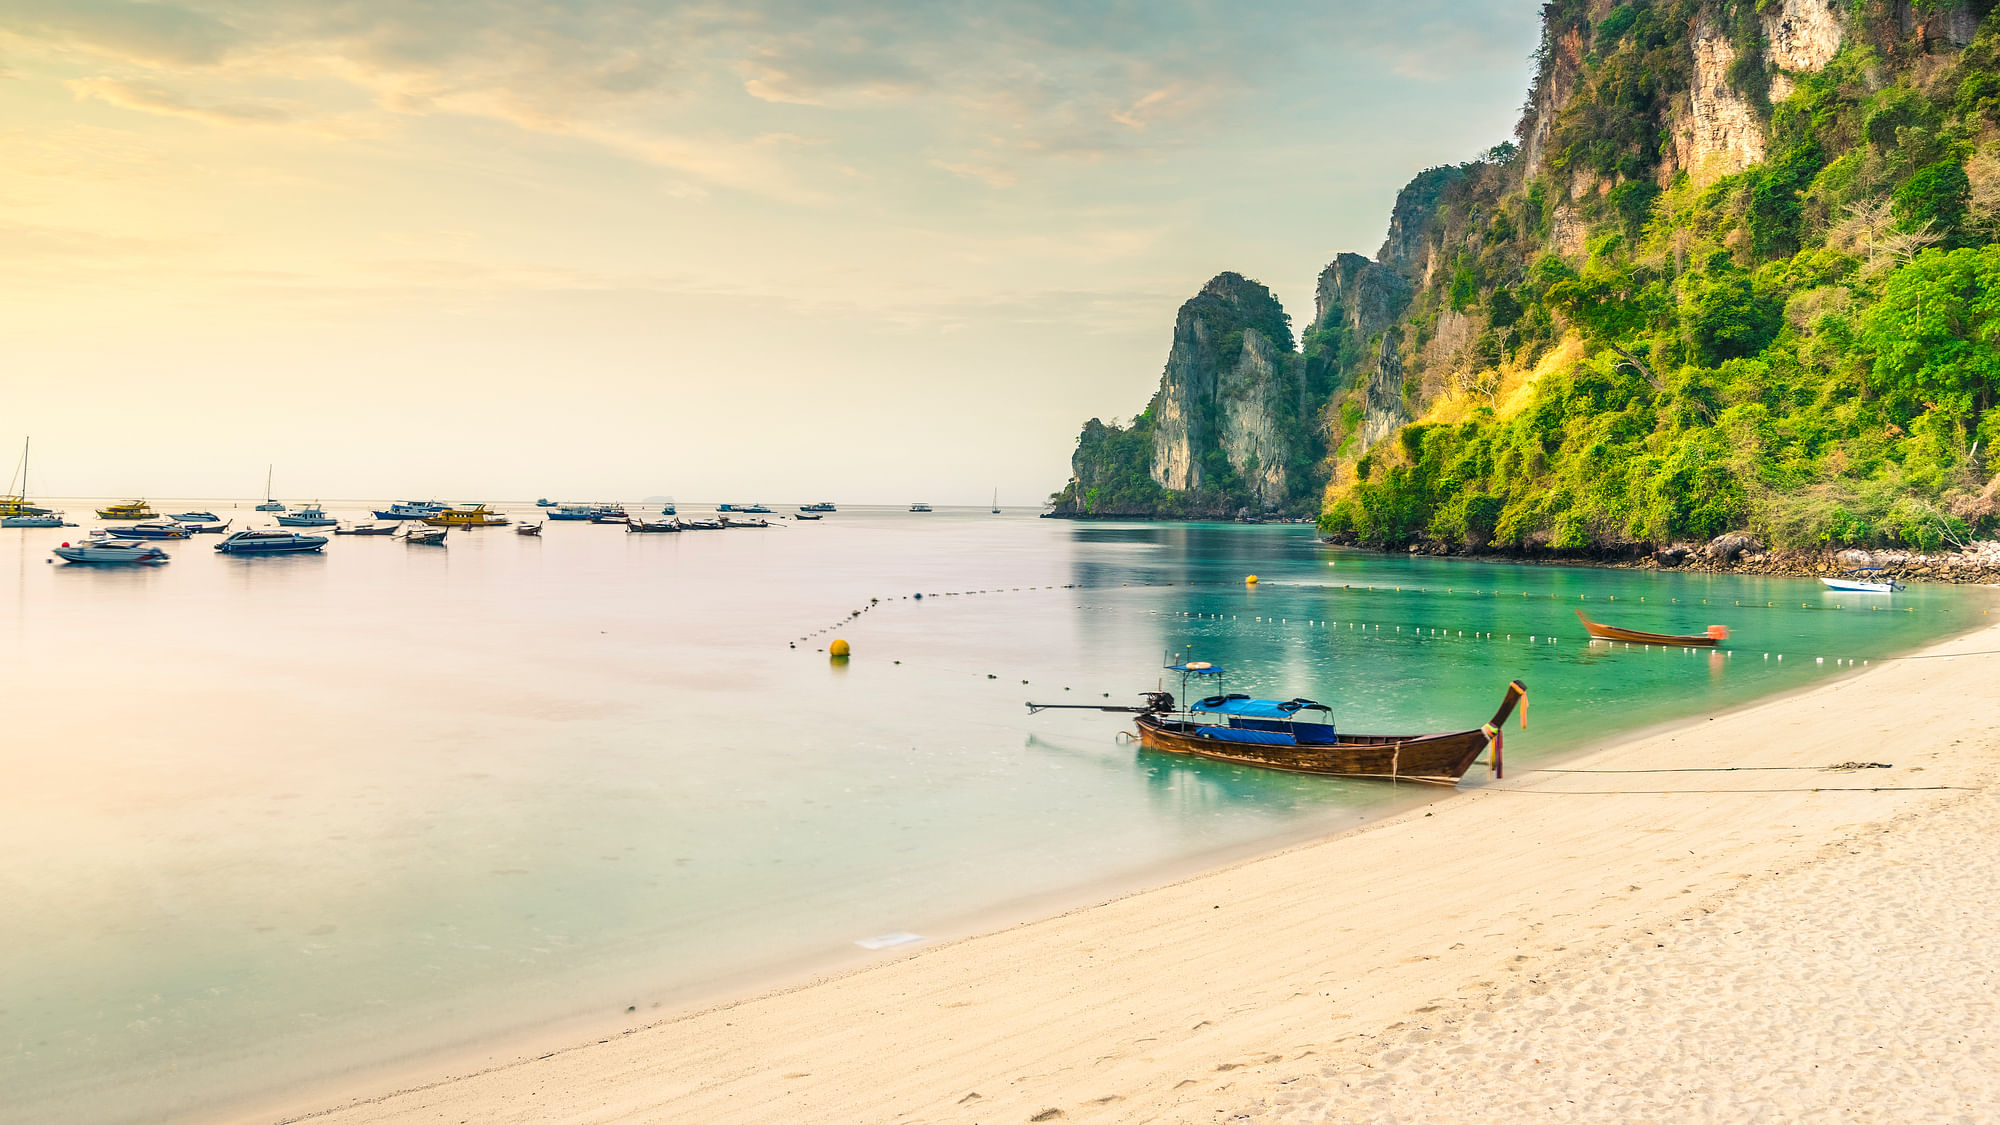 IRCTC is offering a 4-Day tour package to Thailand